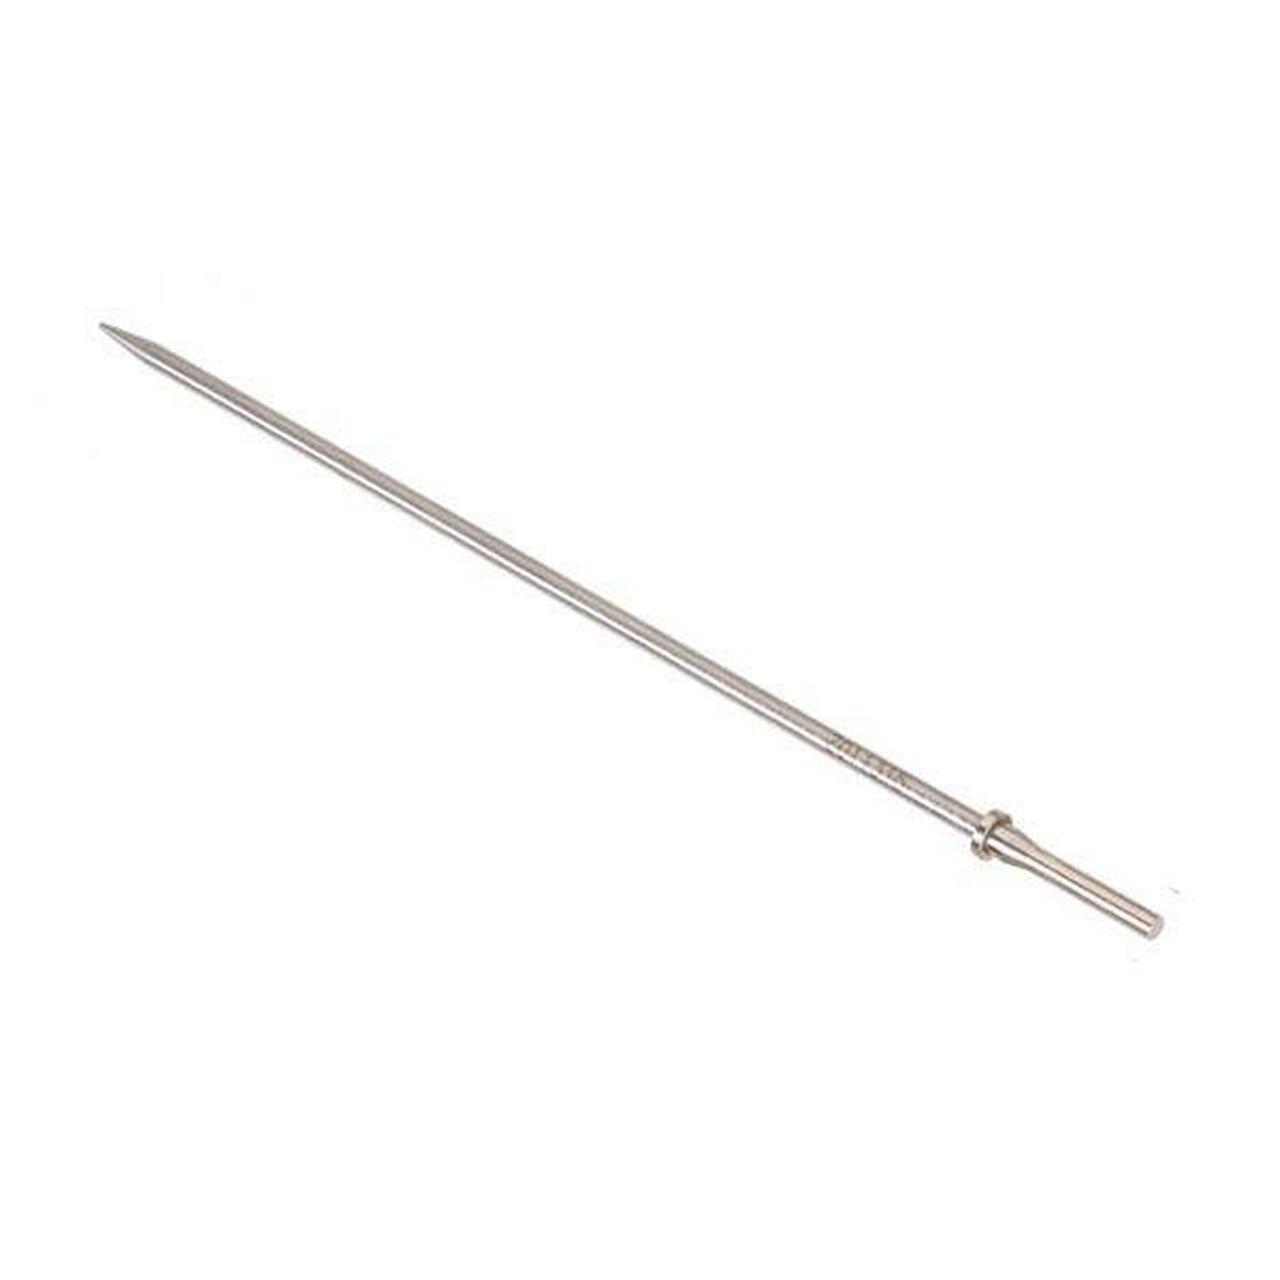 A7520 Stainless Steel Fluid Needle for AtomiZer Gun